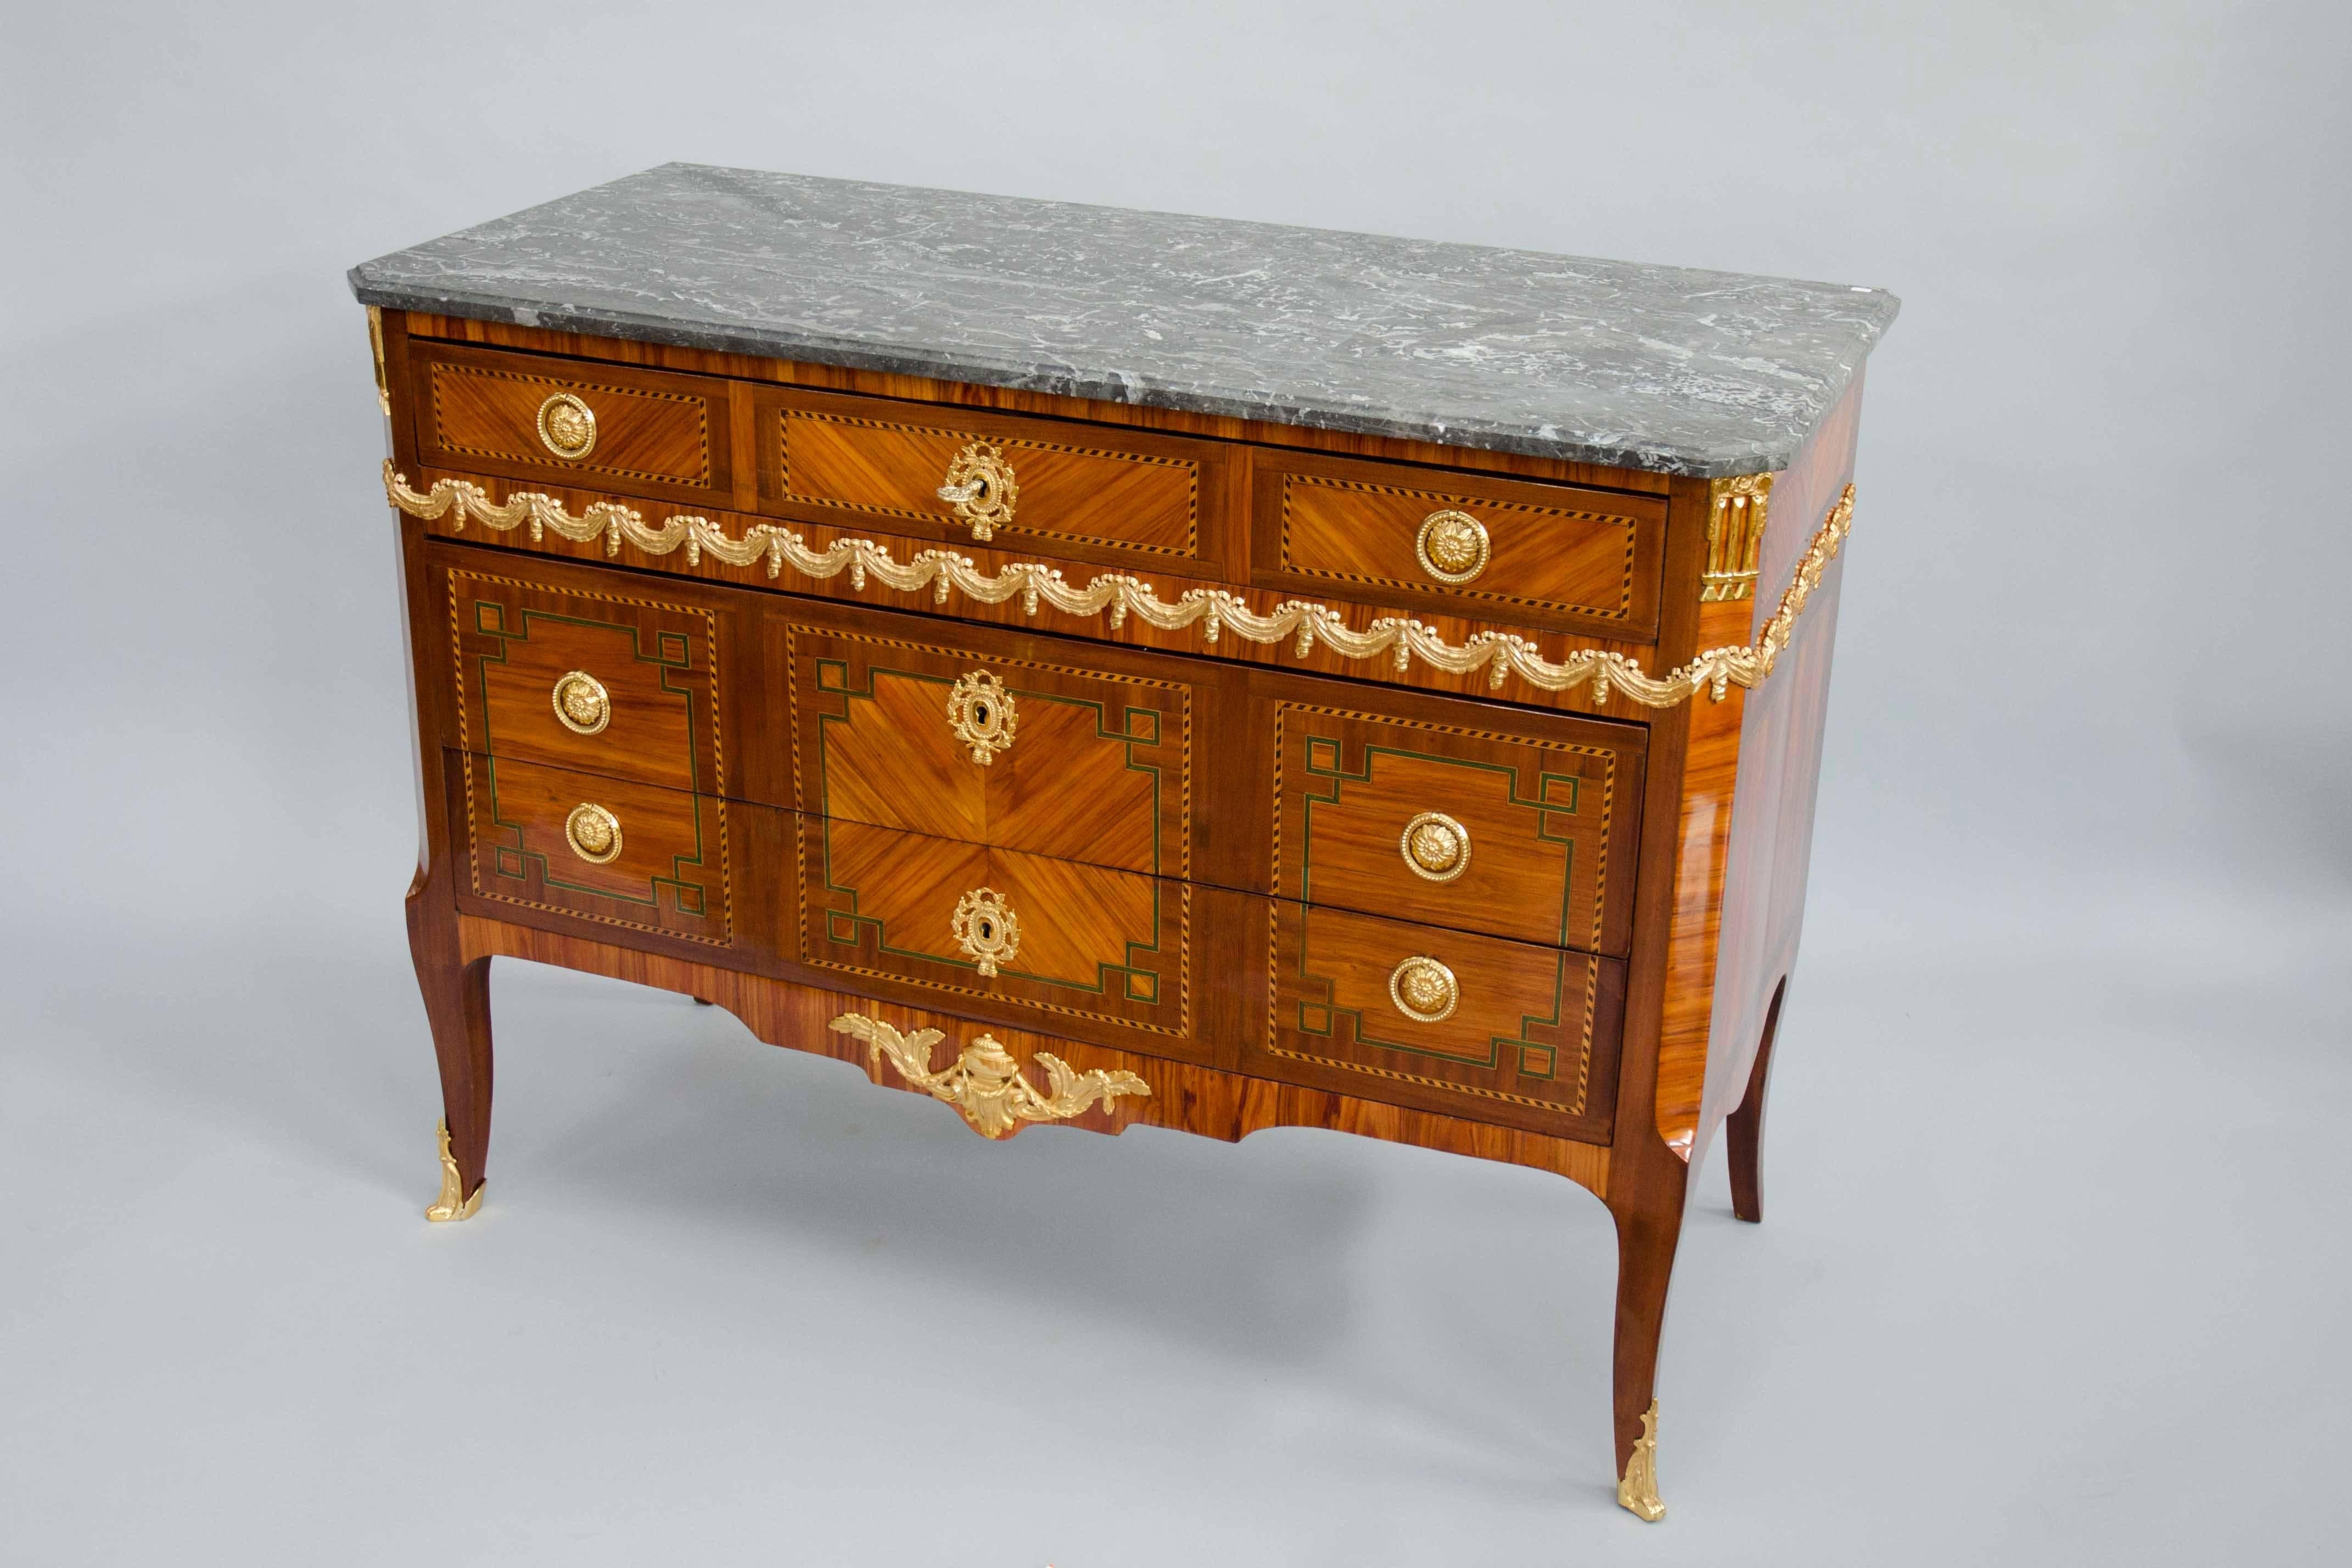 Gorgeous transition style three drawers commode. Rosewood and mahogany veneer with elegant gilt bronze decoration including a draped garland. Marble-top 